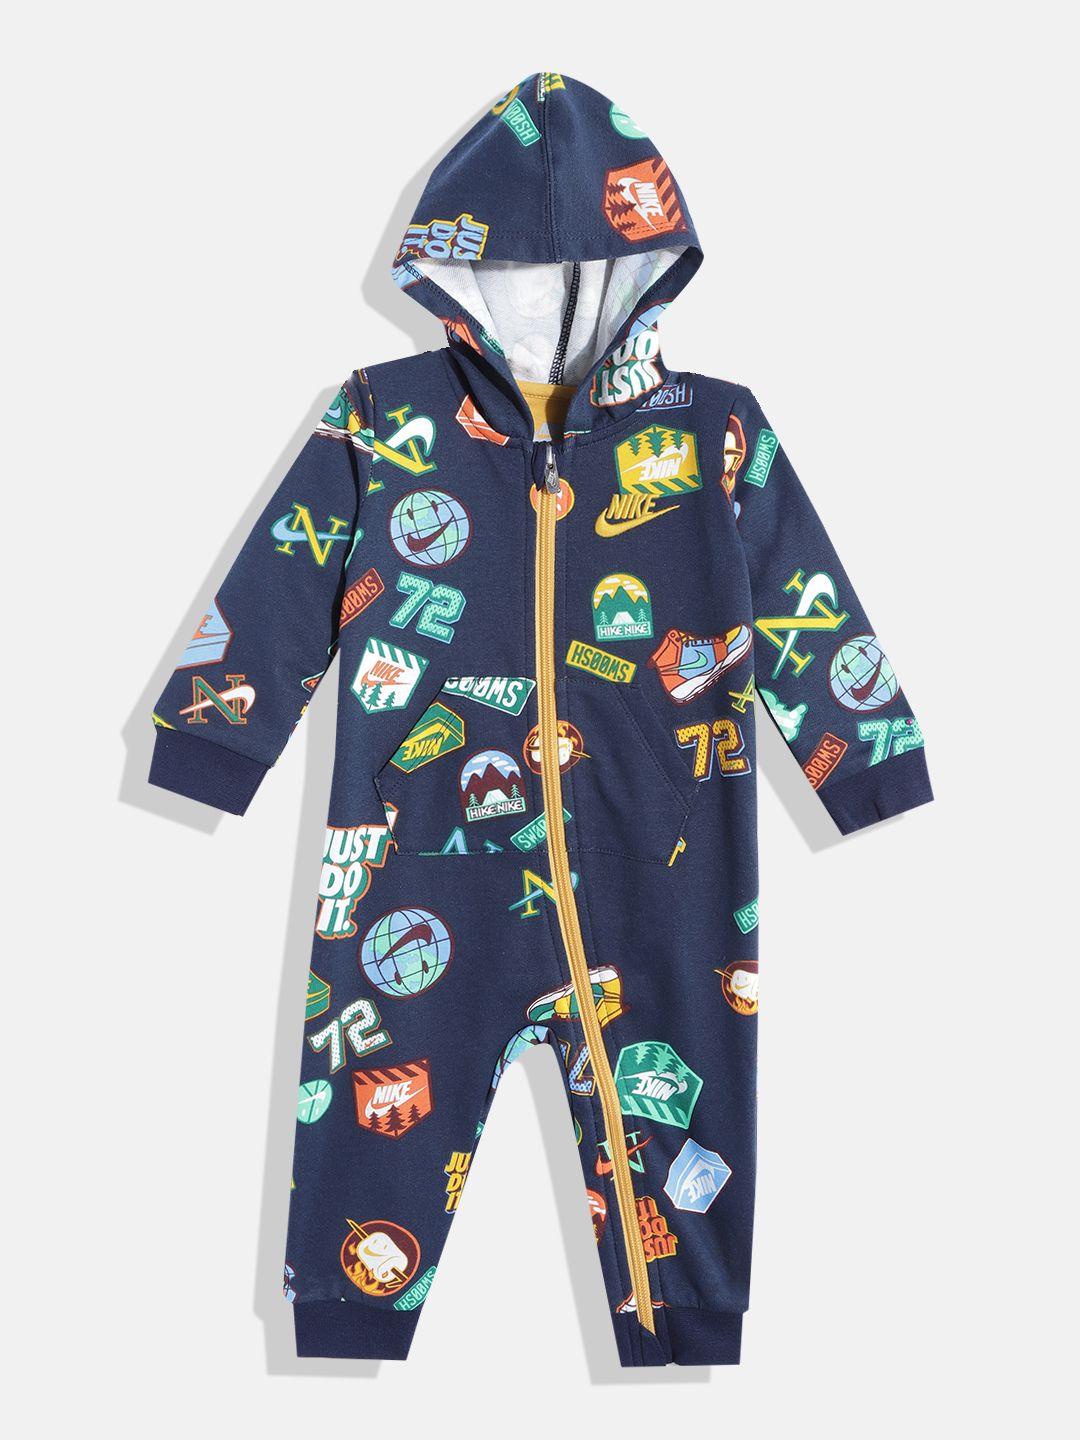 nike-infant-boys-navy-blue-&-yellow-printed-great-outdoors-rompers